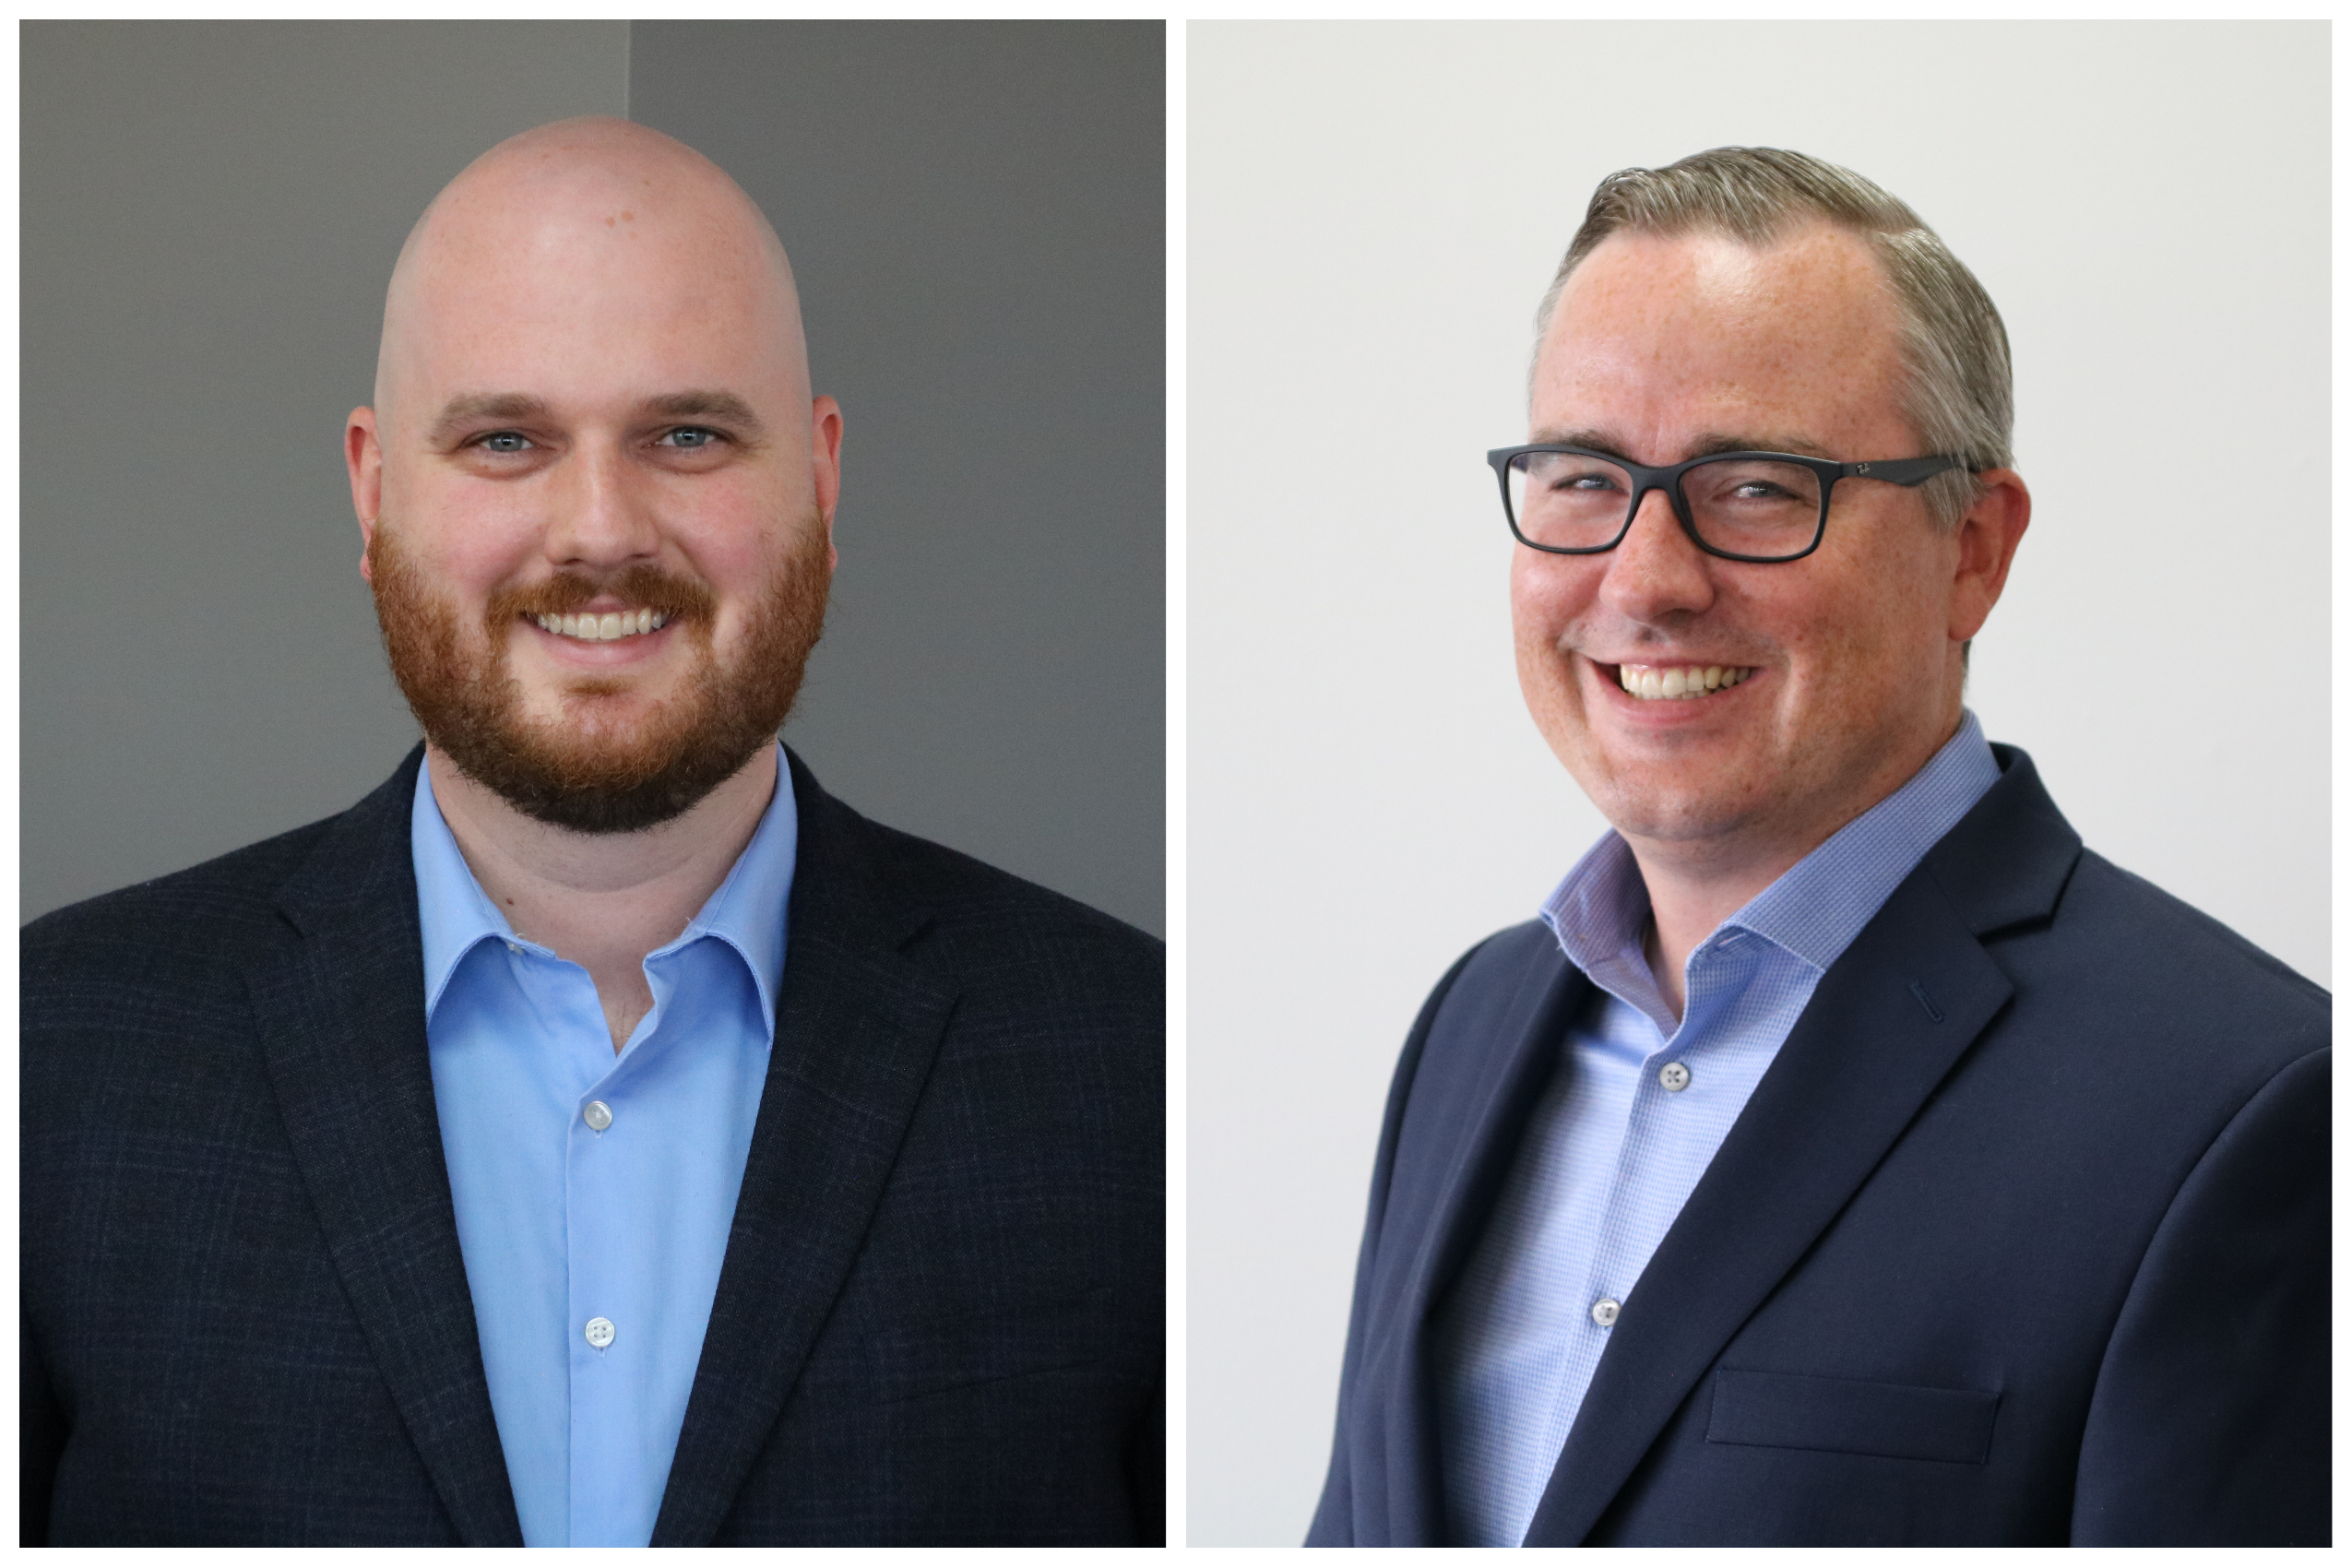 Congratulations to Adam Thompson and Blair Gamracy, our newest certified RRO’s!